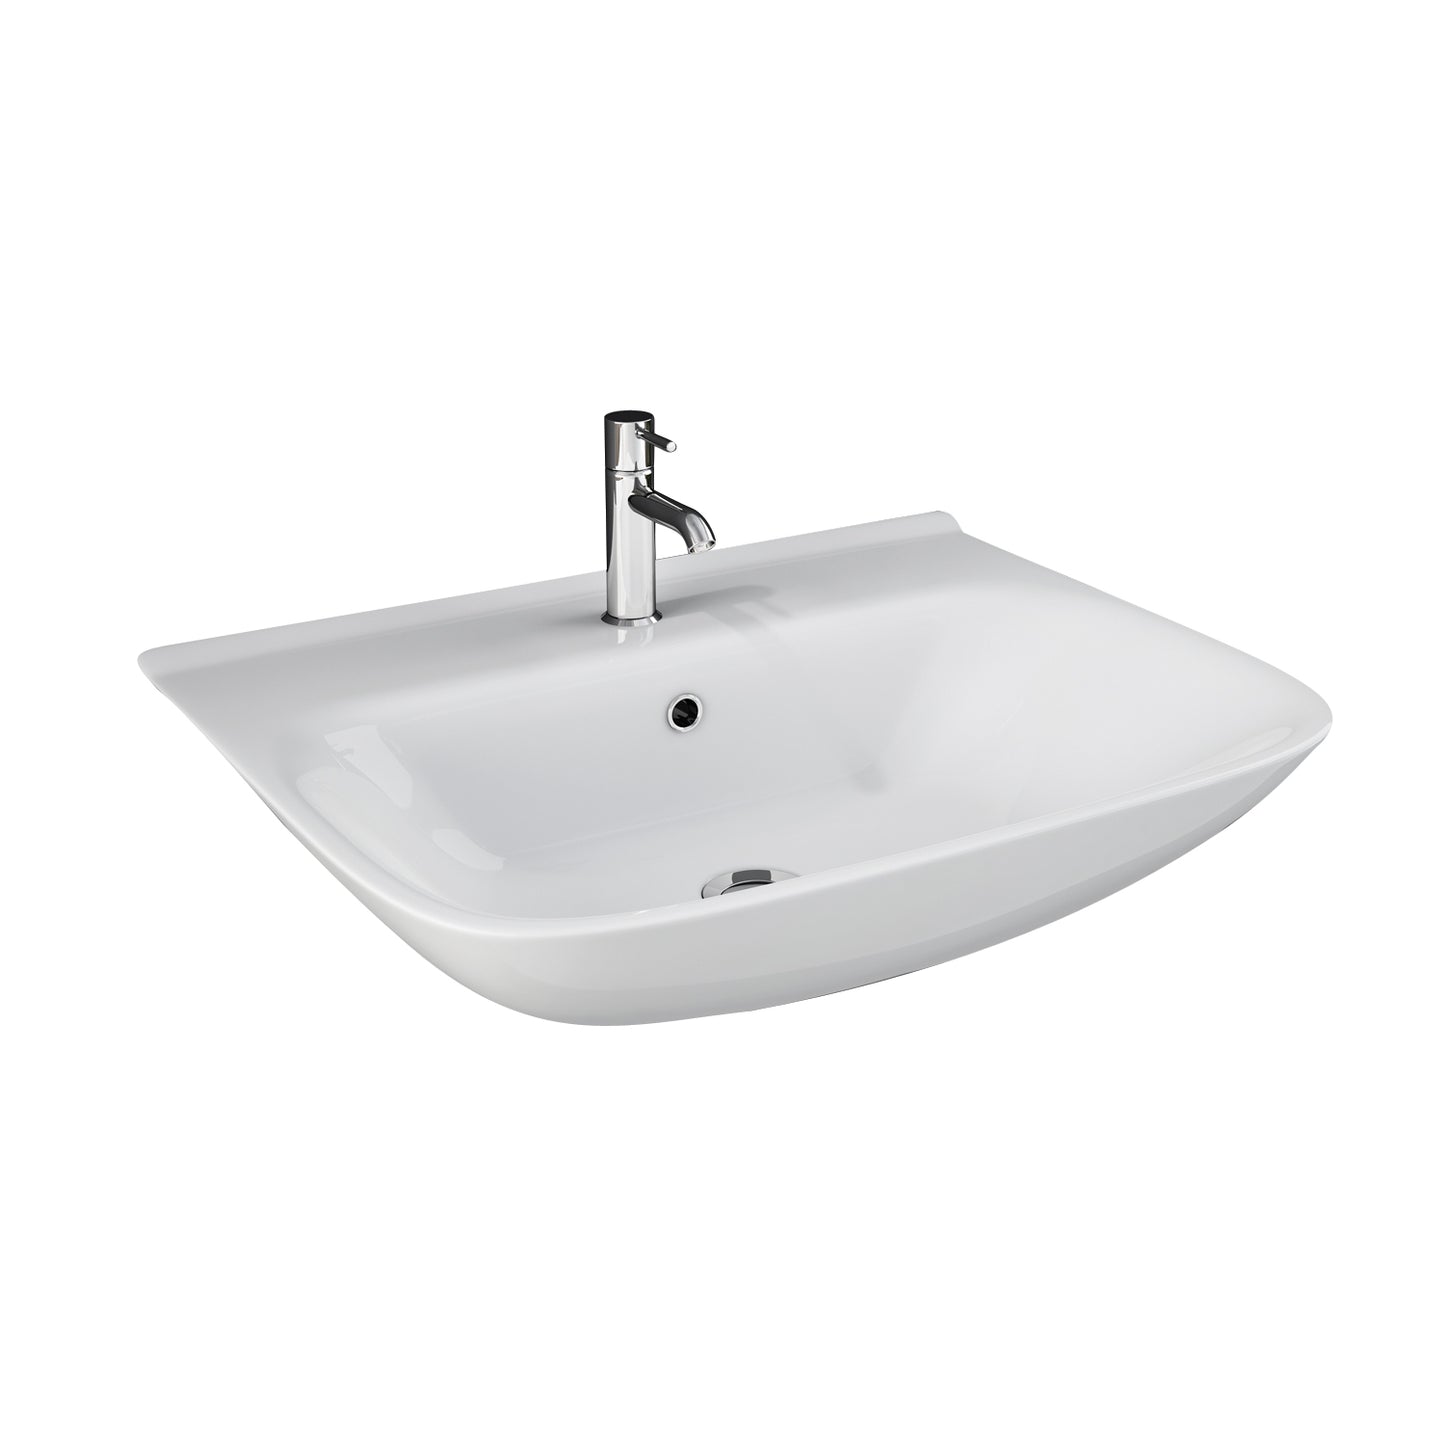 Eden 520 Wall Hung Bathroom Sink with 1 Faucet Hole White